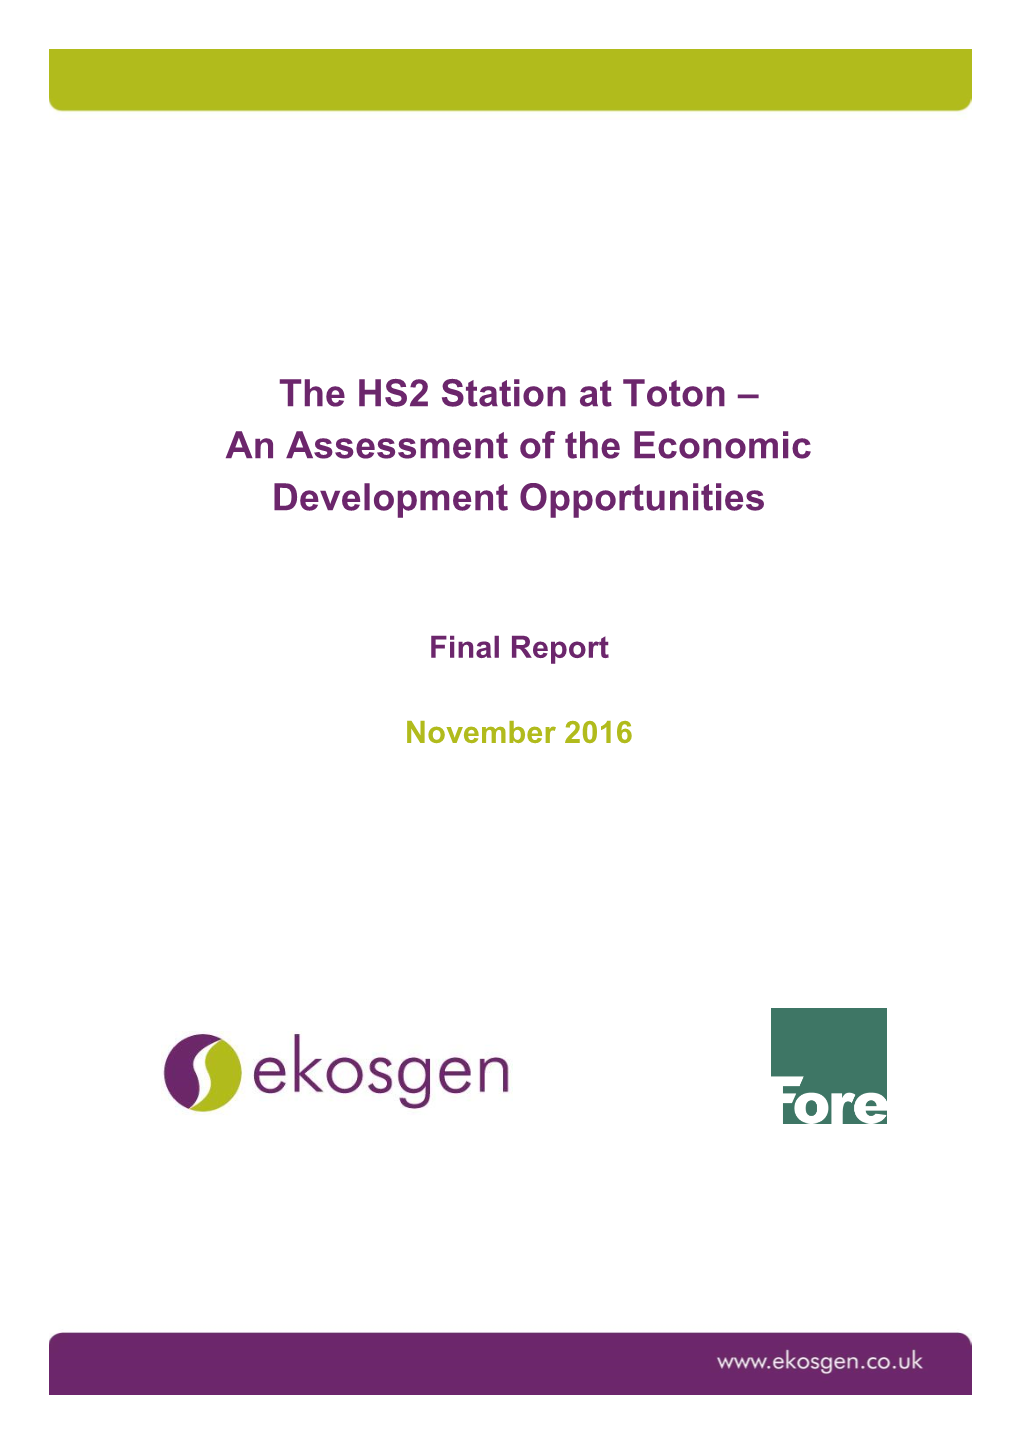 The HS2 Station at Toton – an Assessment of the Economic Development Opportunities